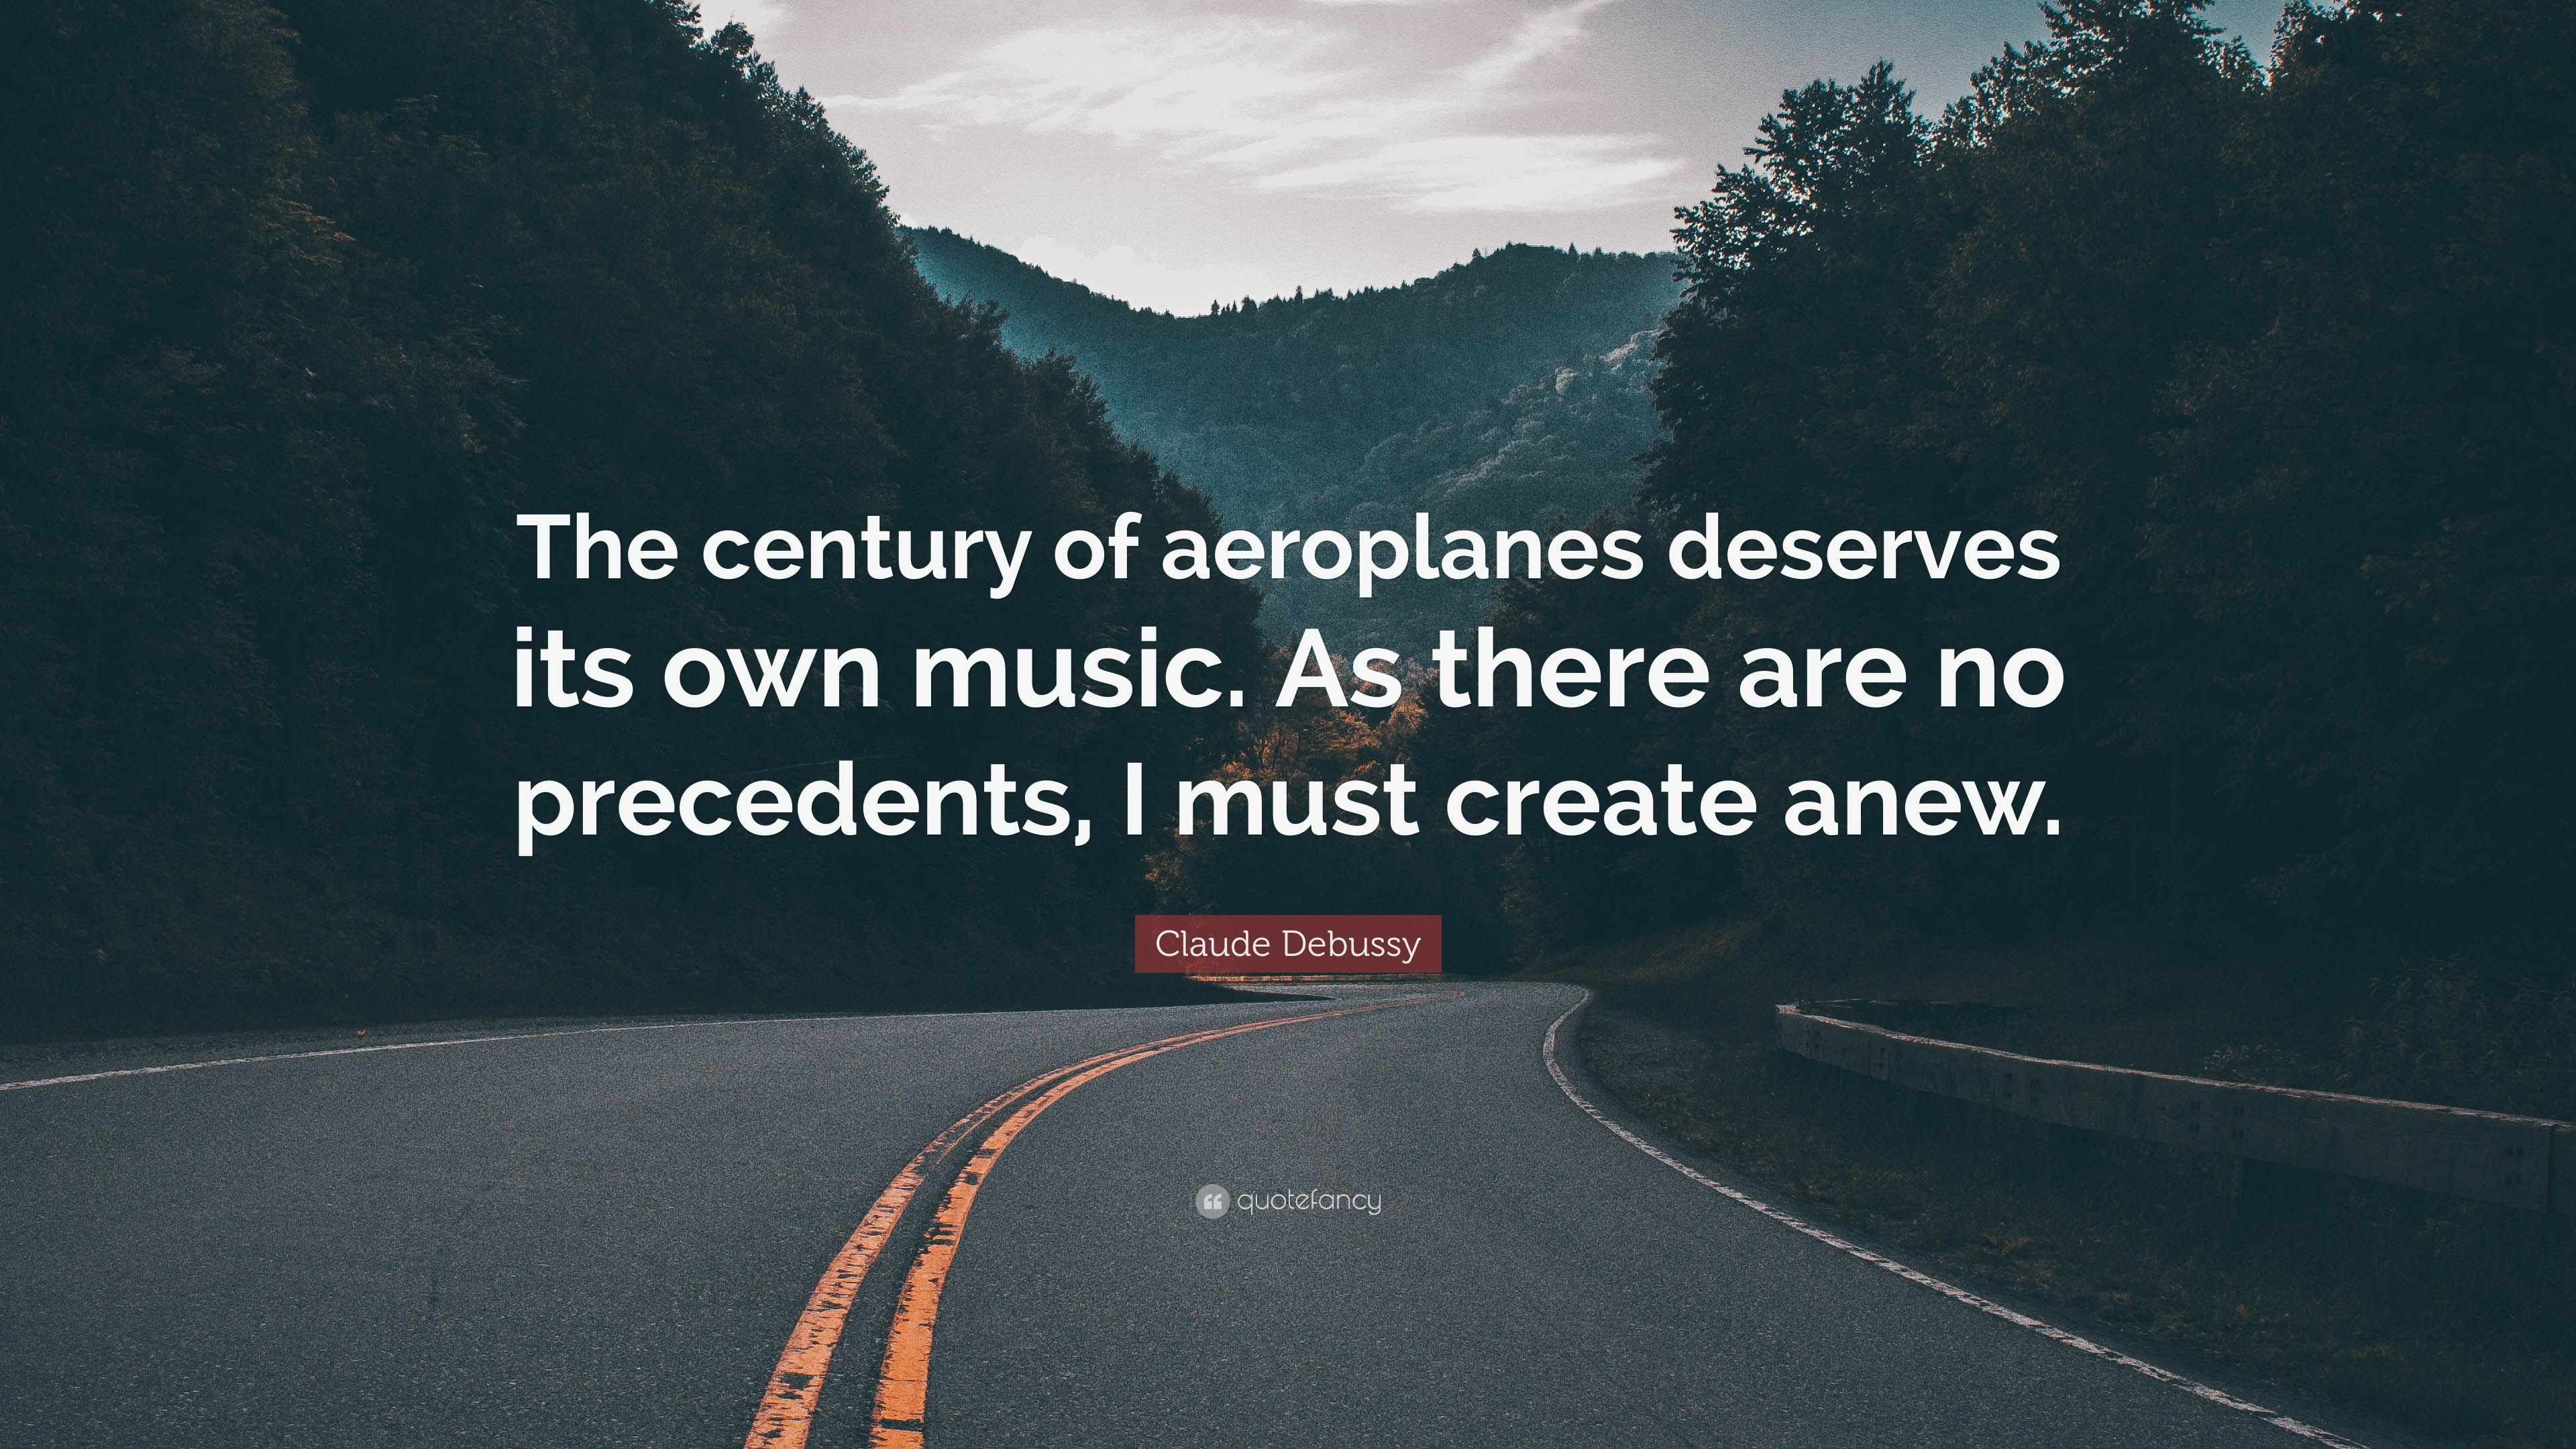 3840x2160 Claude Debussy Quote: “The century of aeroplanes deserves its own music. As  there